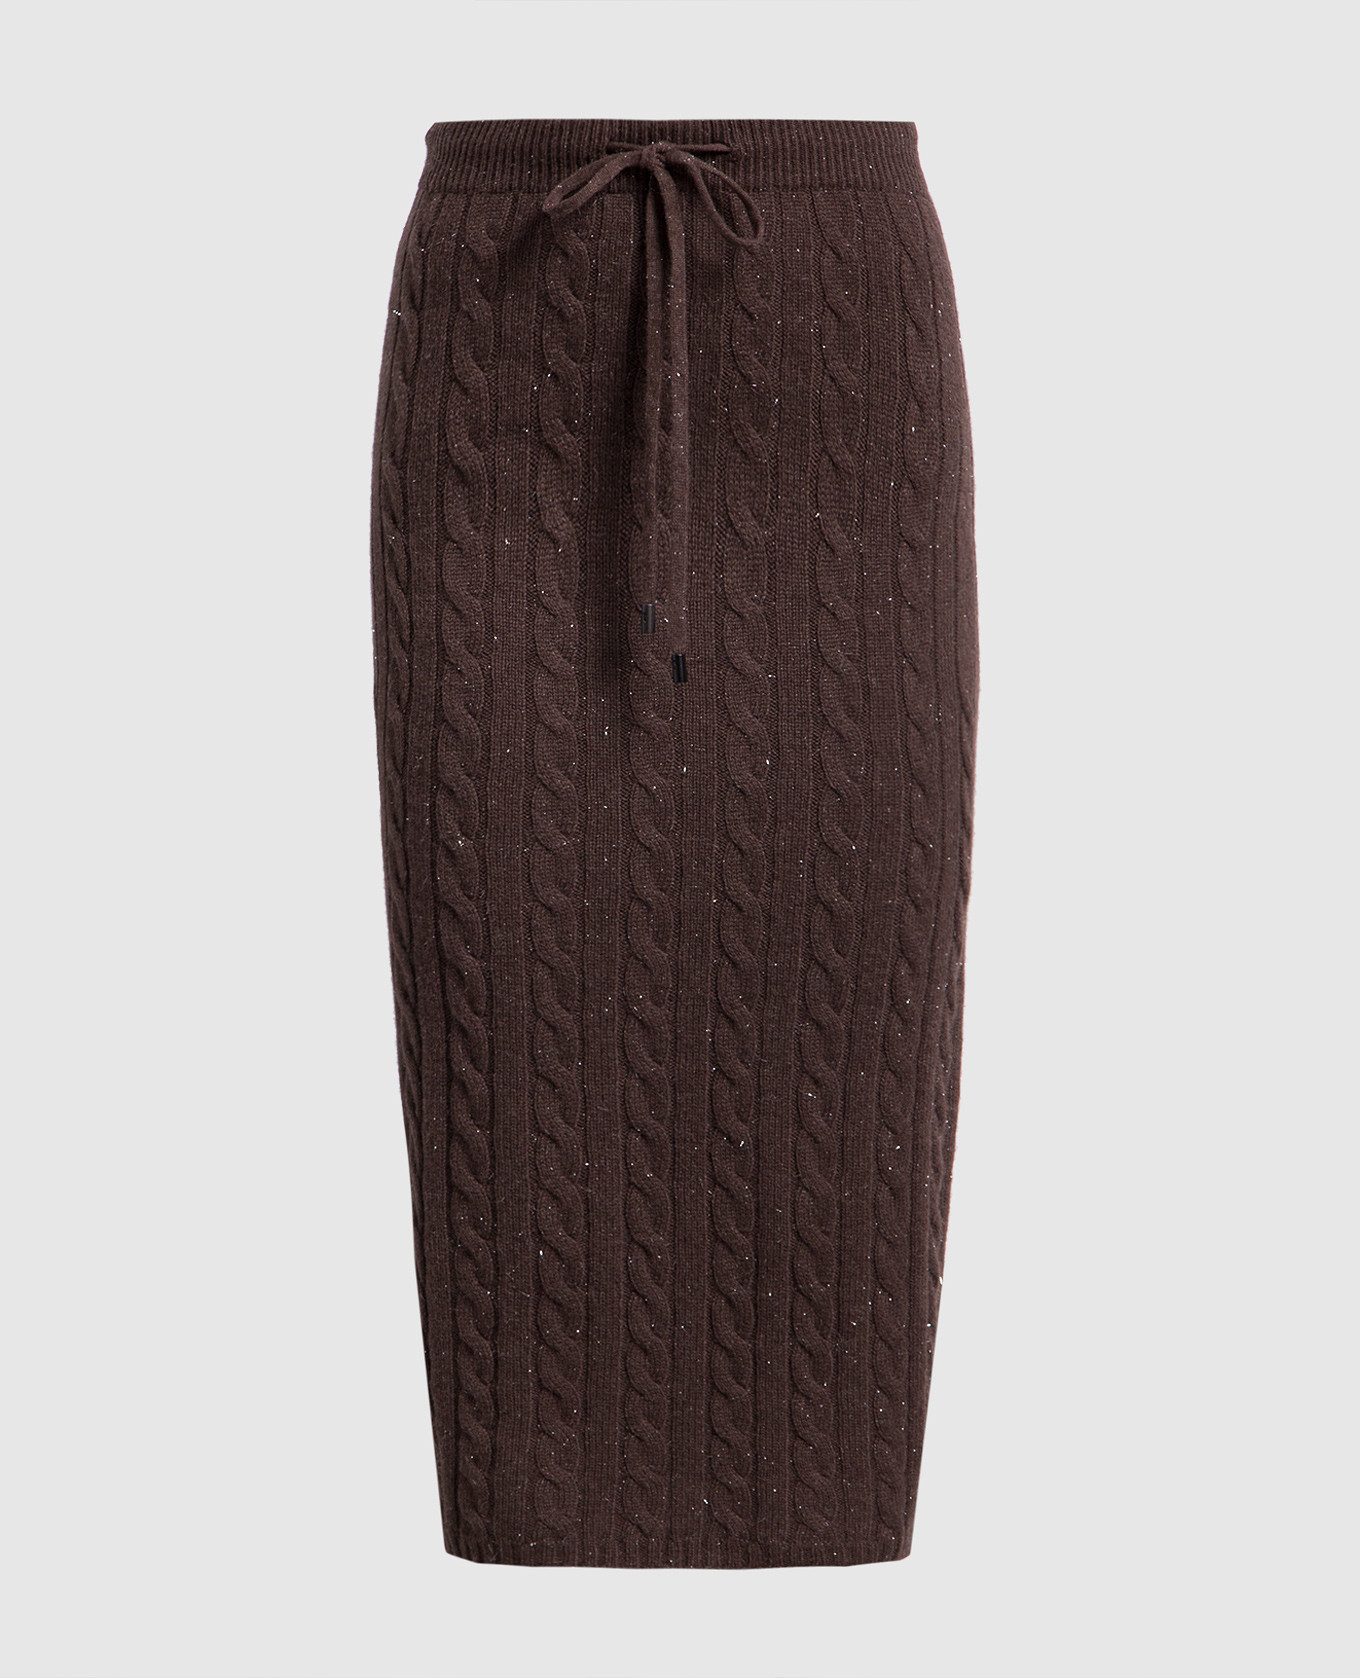 Brown midi skirt with textured pattern and lurex